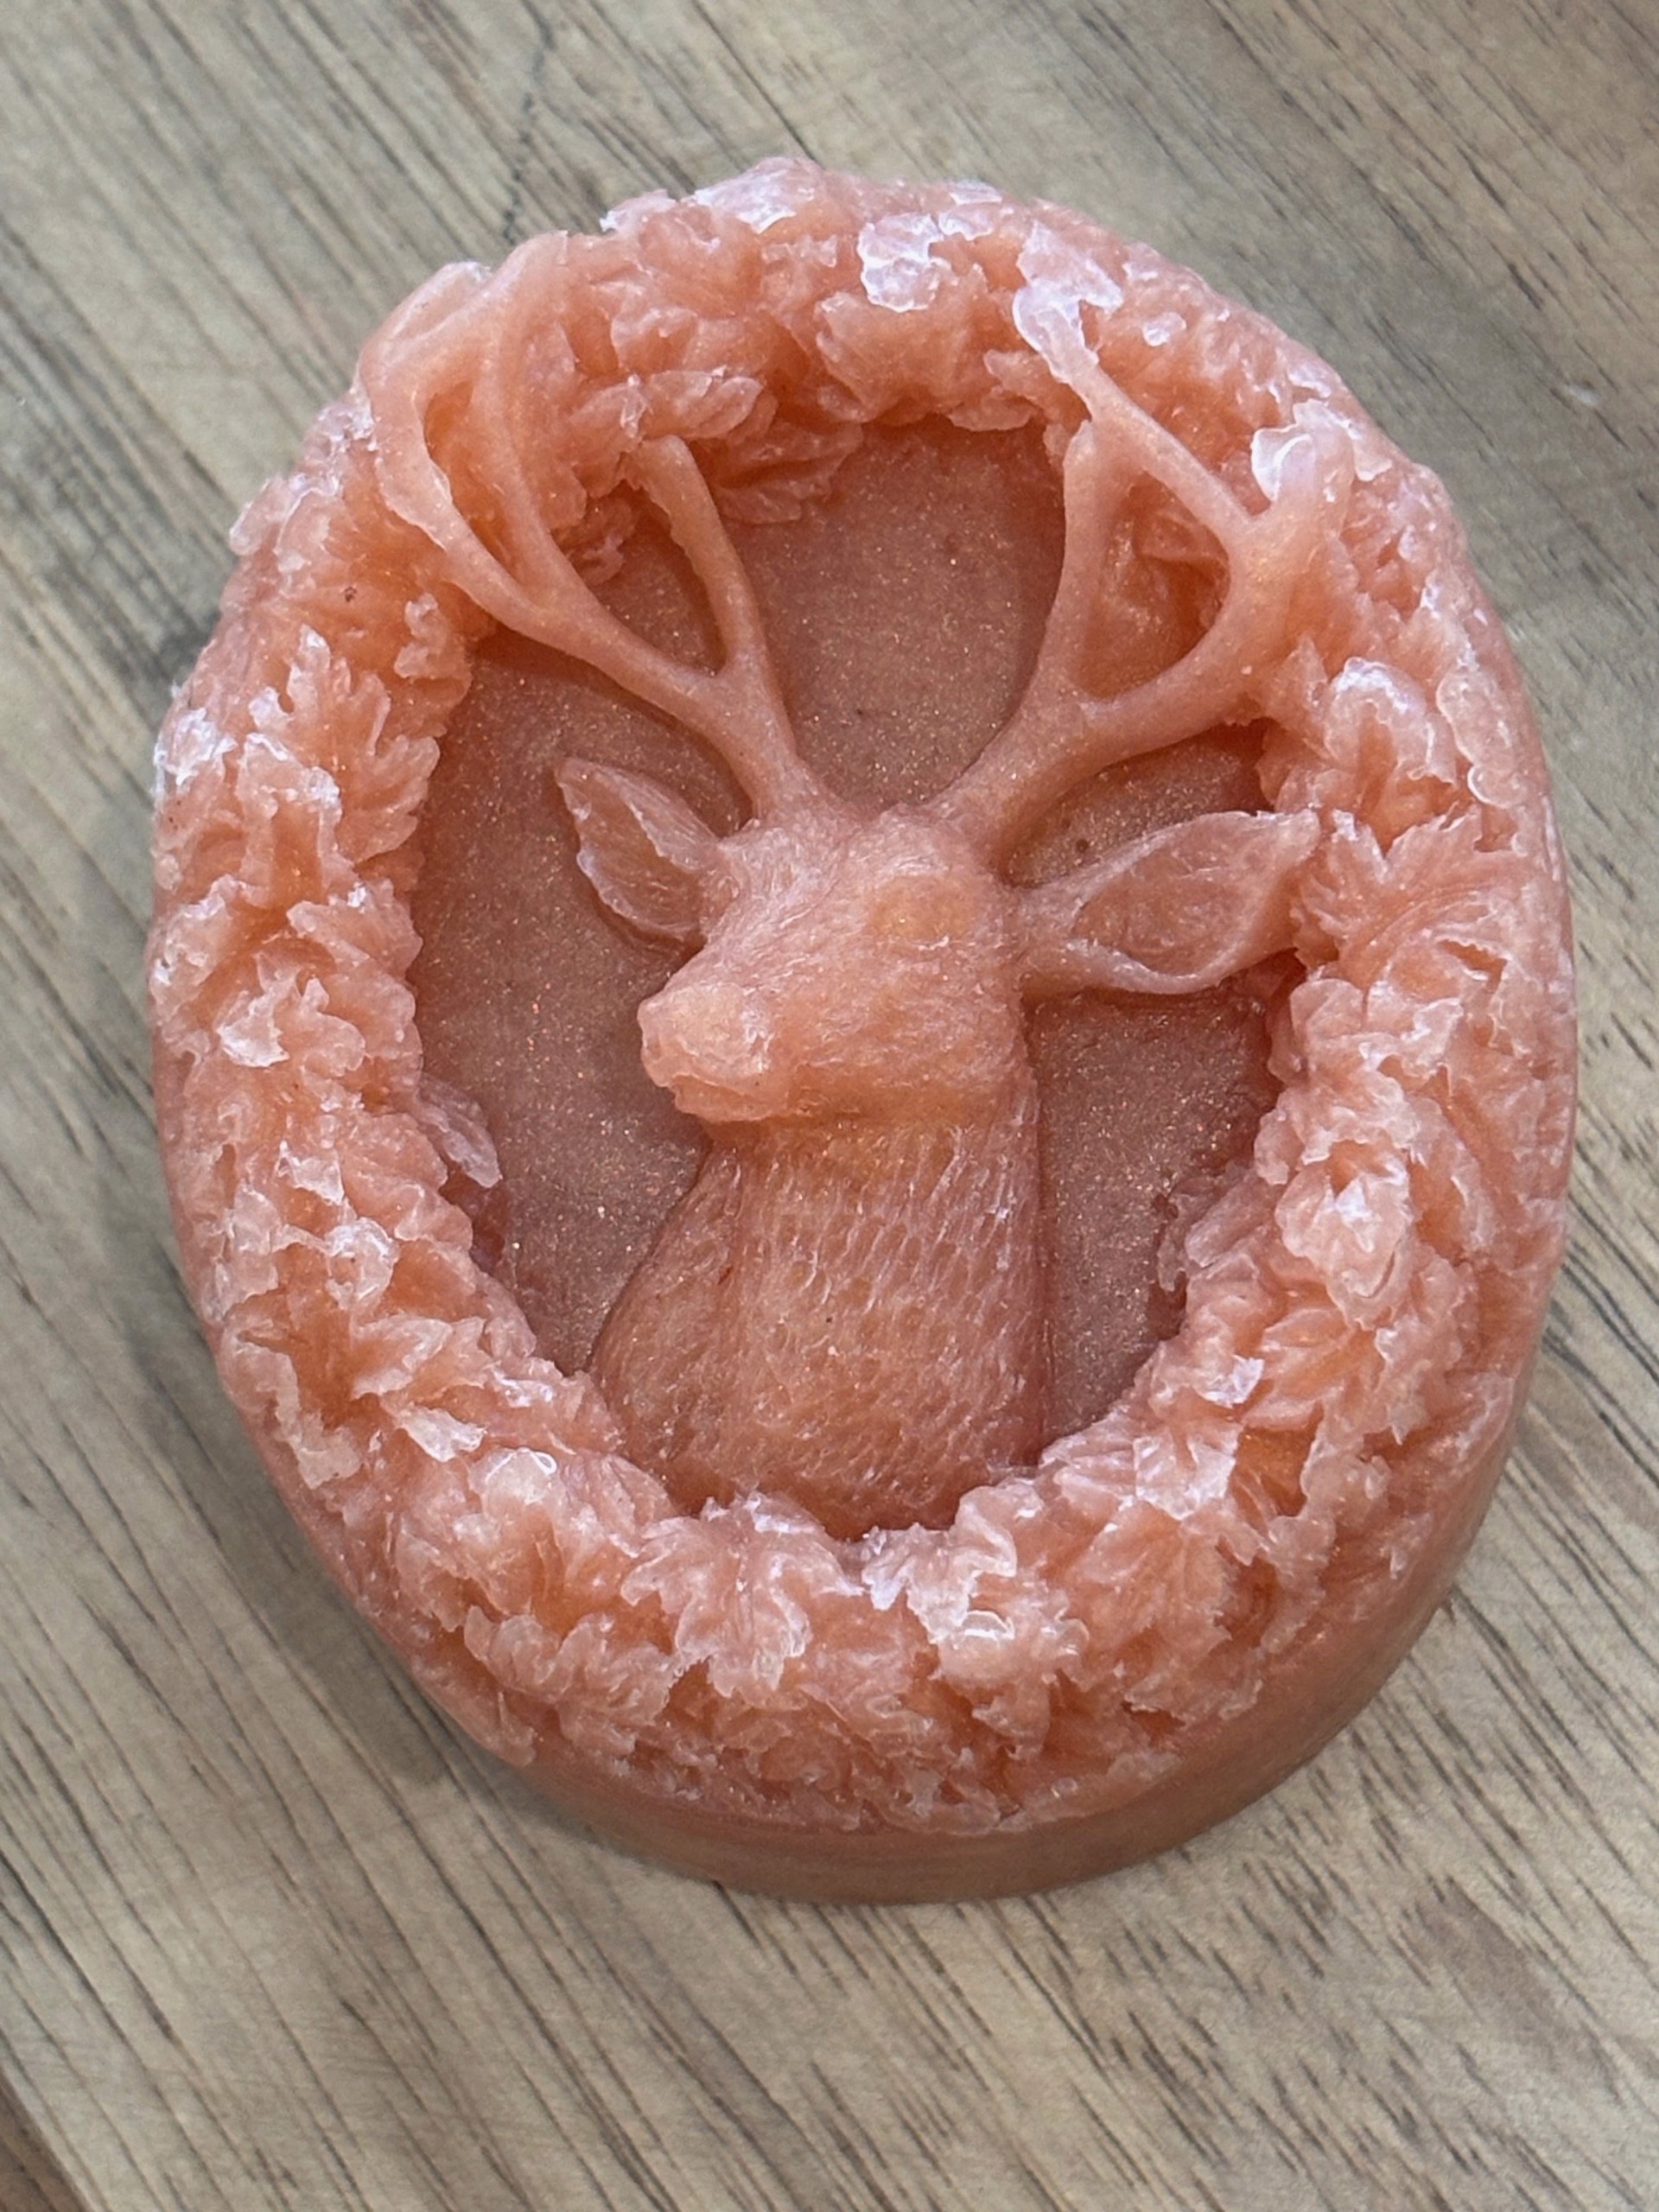 Mississippi 8 Point Soap by The Honeysuckle Barn